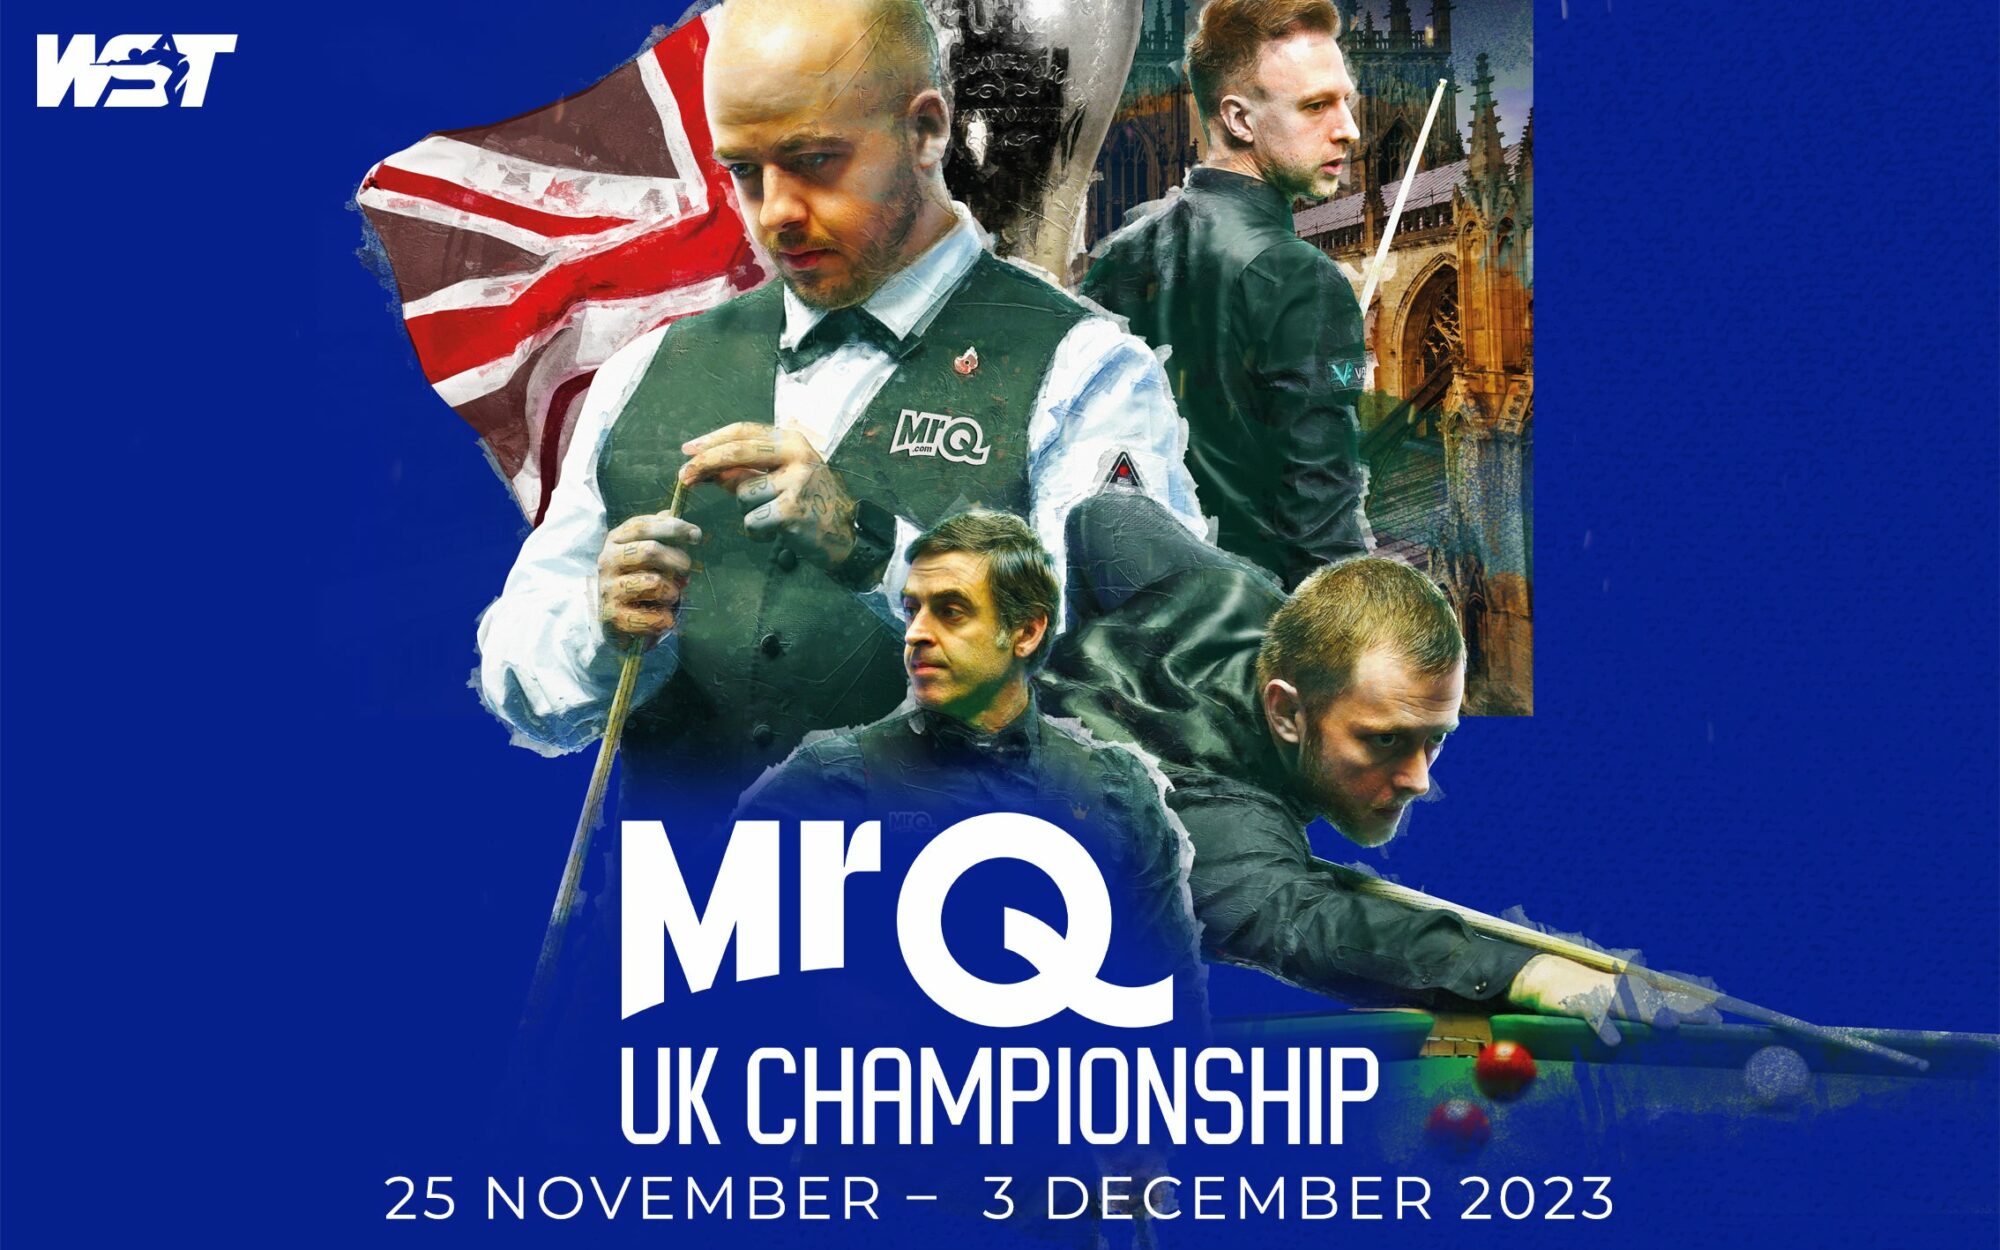 Image name MrQ UK Championship Snooker Evening at York Barbican York 1 the 2 image from the post MrQ UK Championship Snooker - Afternoon at York Barbican, York in Yorkshire.com.